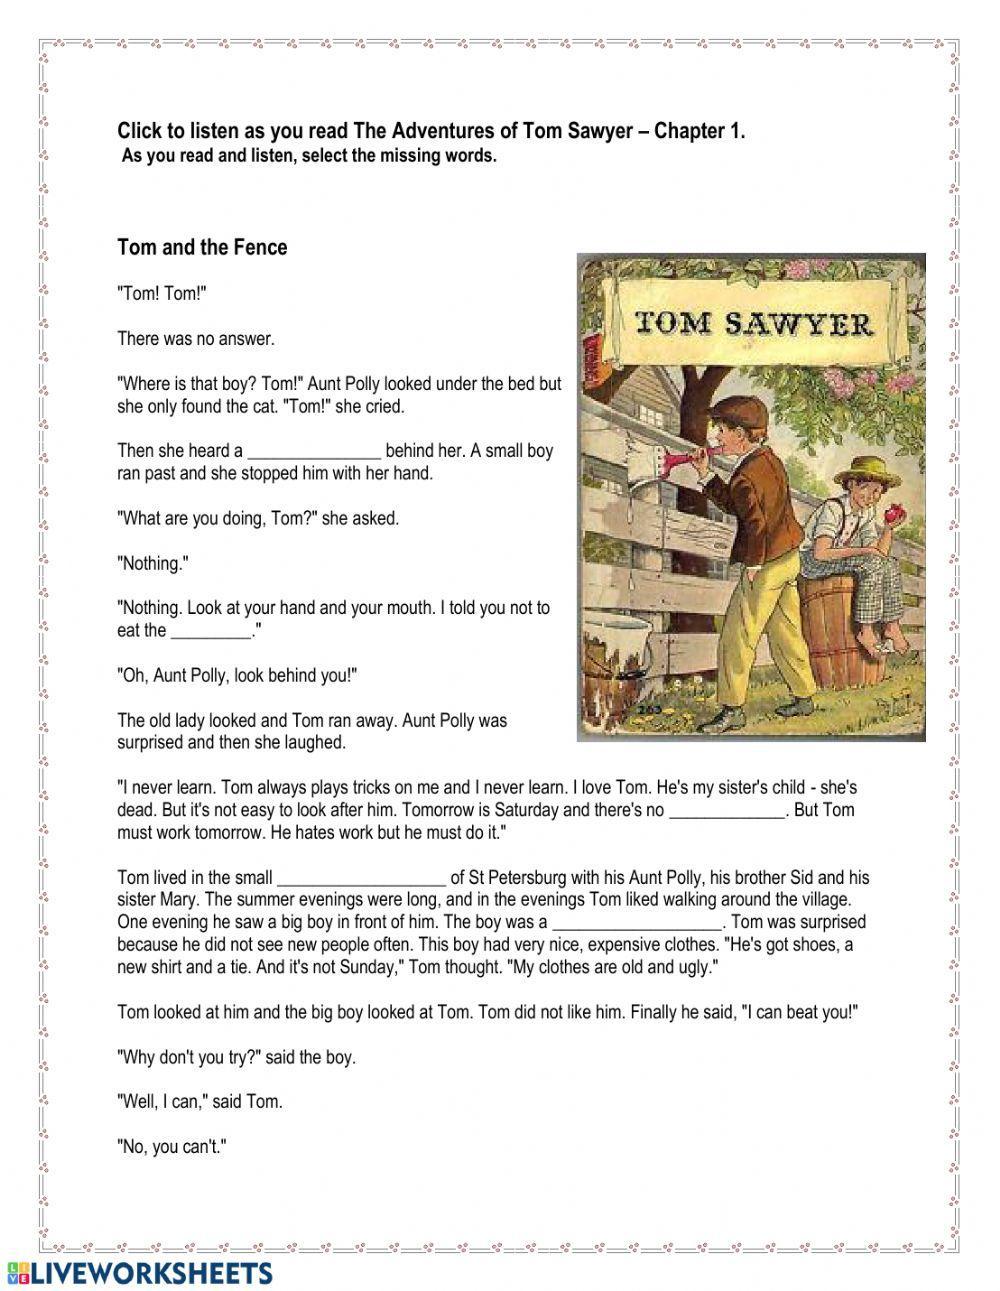 The Adventures of Tom Sawyer Chapter 1